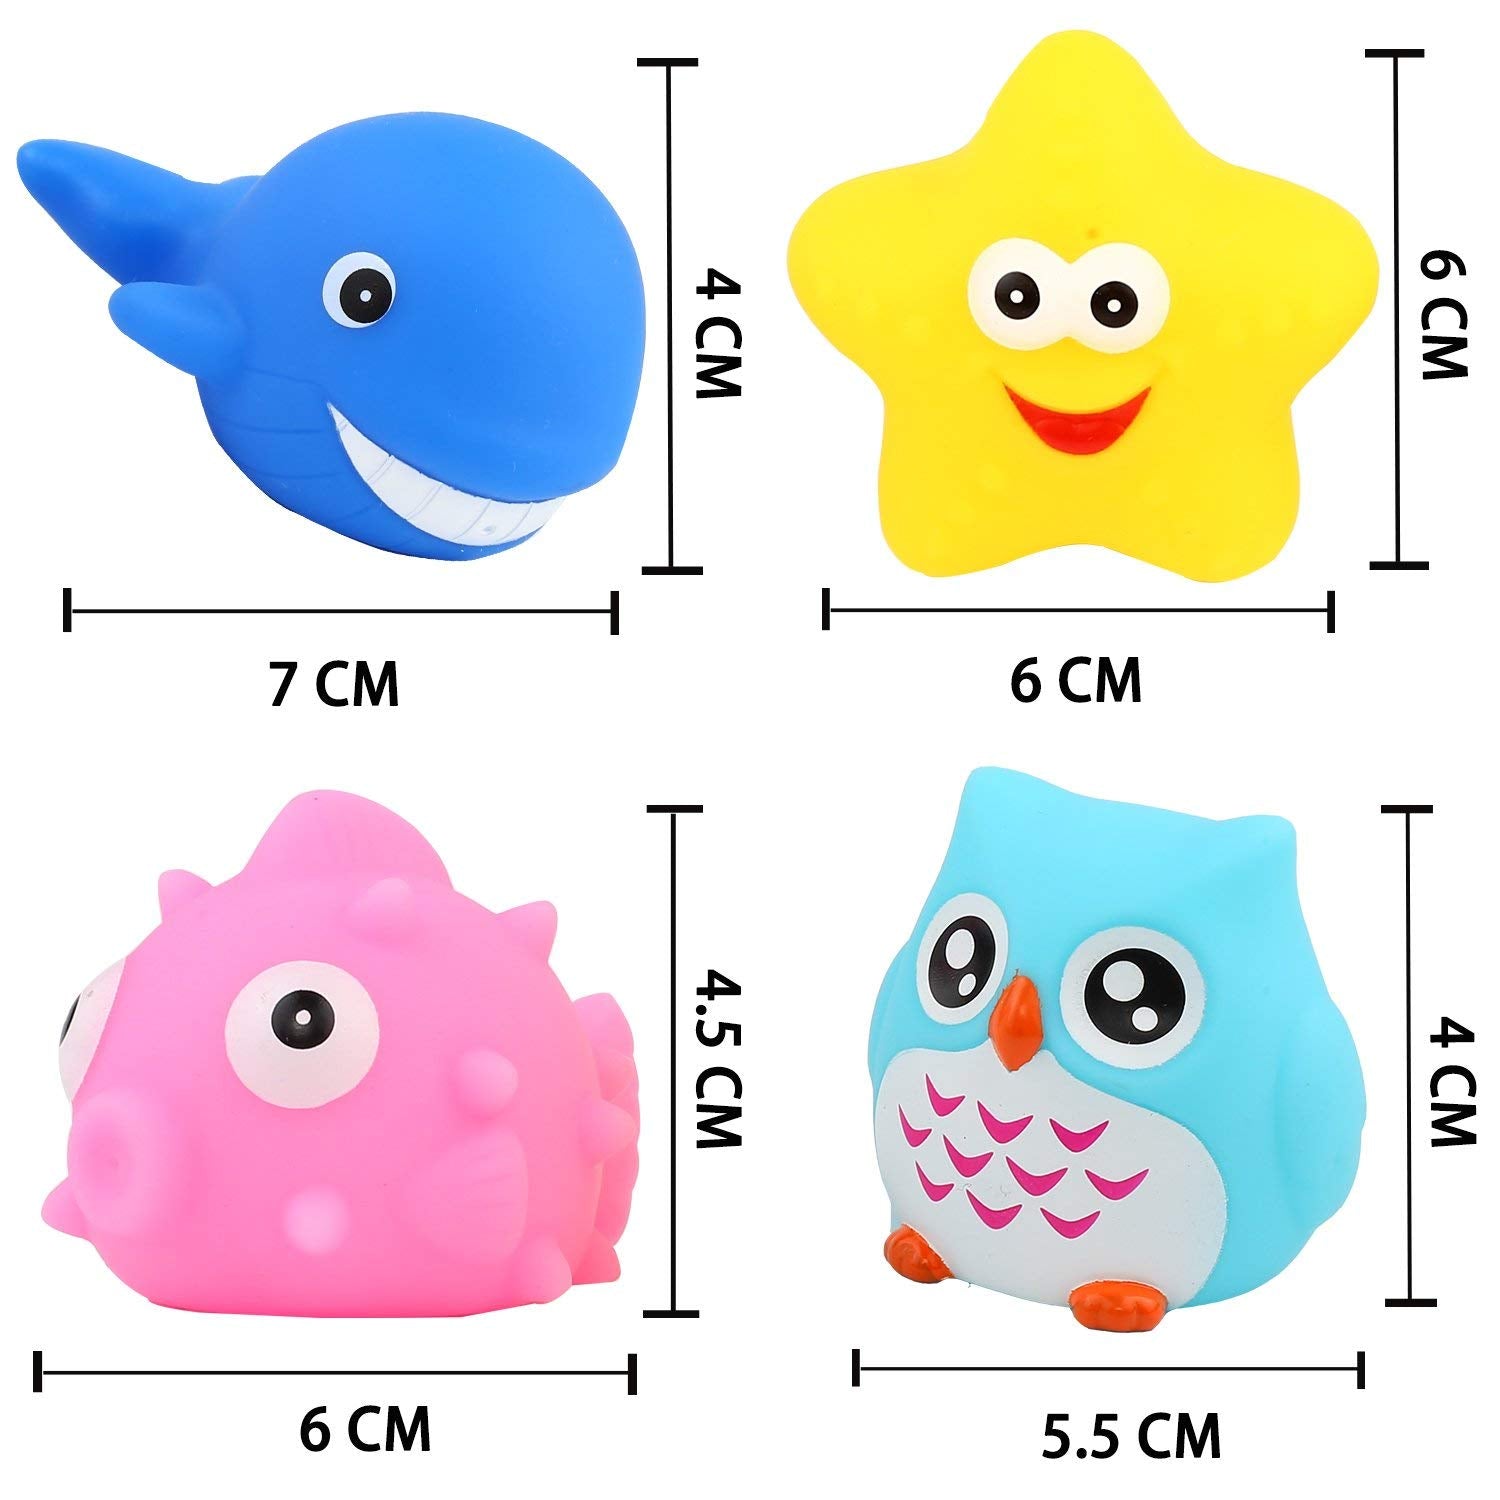 Bath Toys, 8 Pcs Light Up Floating Rubber animal Toys set, Flashing Color Changing Light in Water, Baby Infants Kids Toddler Child Preschool Bathtub Bathroom Shower Games Swimming Pool Party